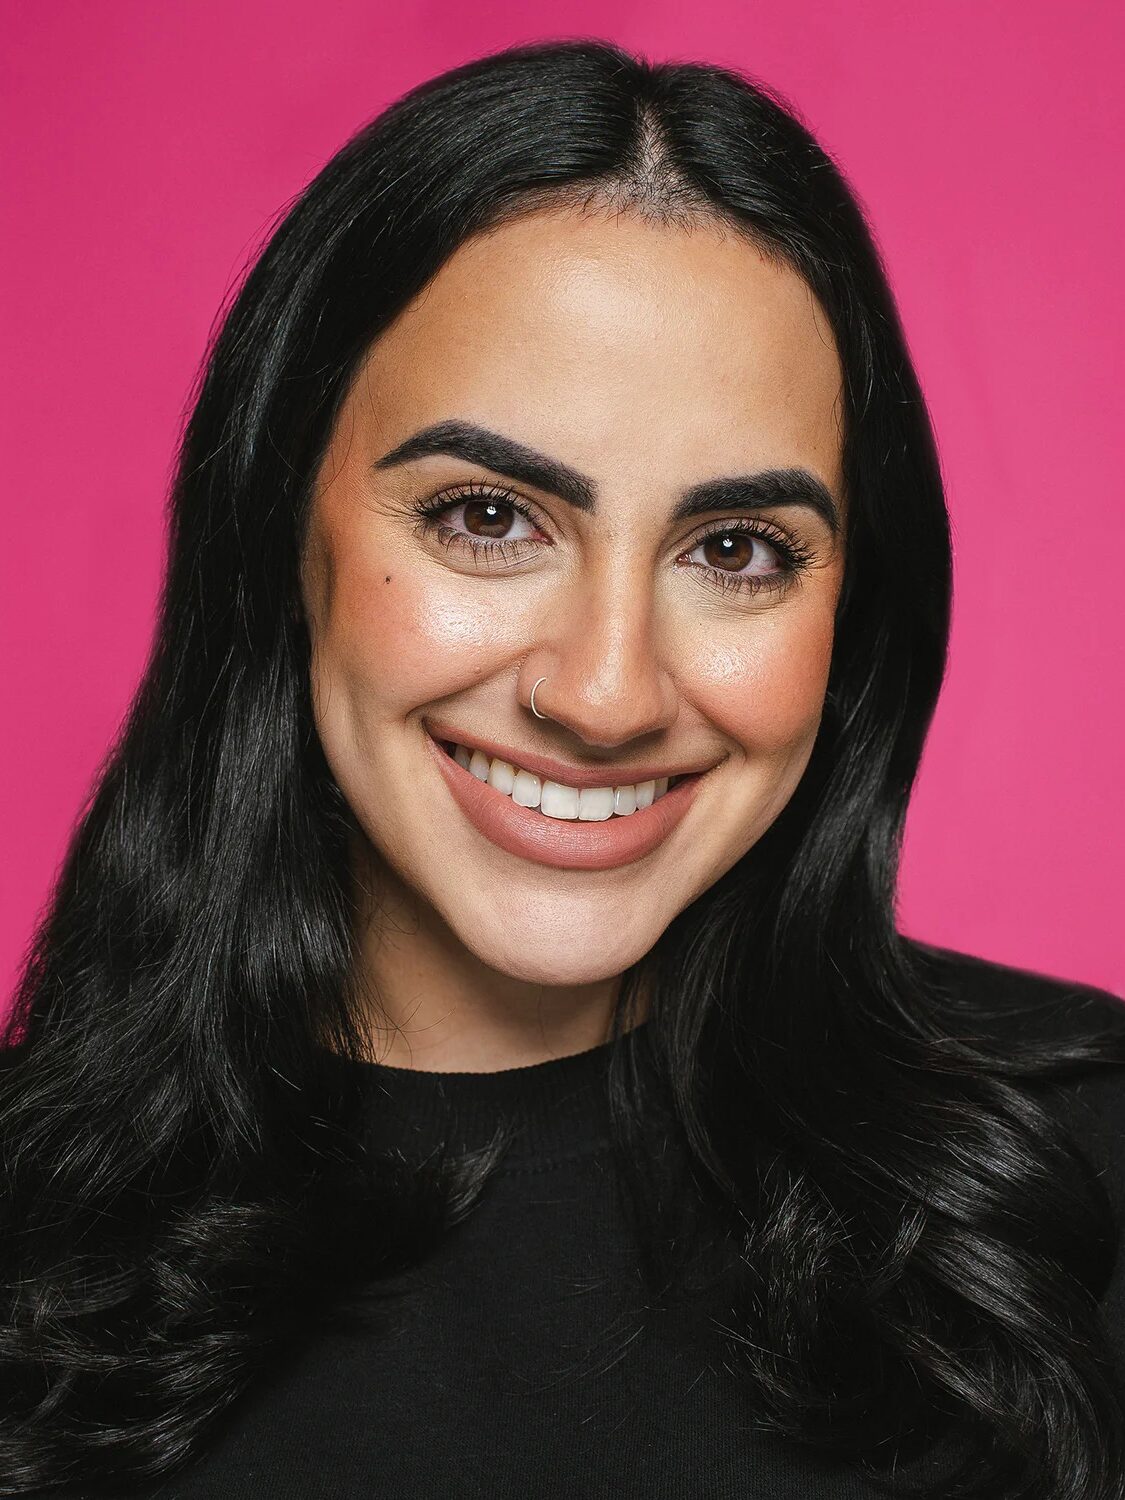 Woman with long black hair, wearing a nose ring and black top, smiling against a bright pink background.